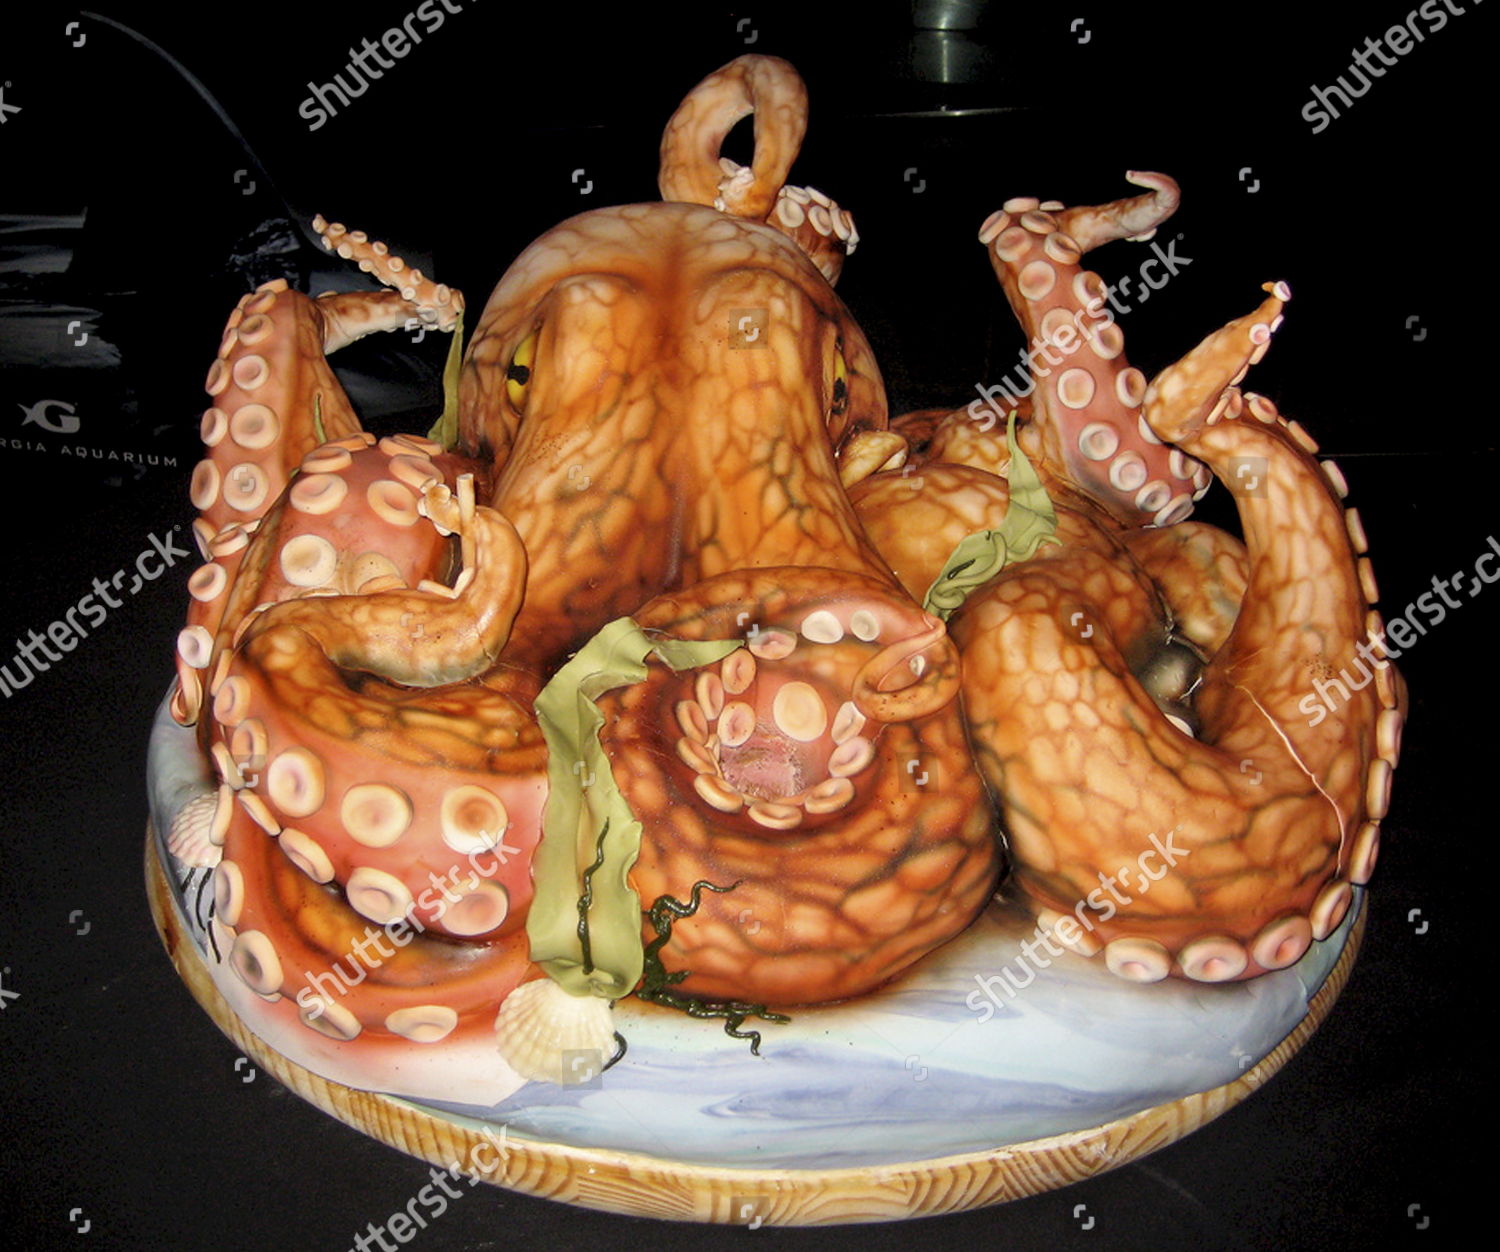 Blue Ring Octopus Cake | Octopus cake, Themed cakes, Ocean cakes